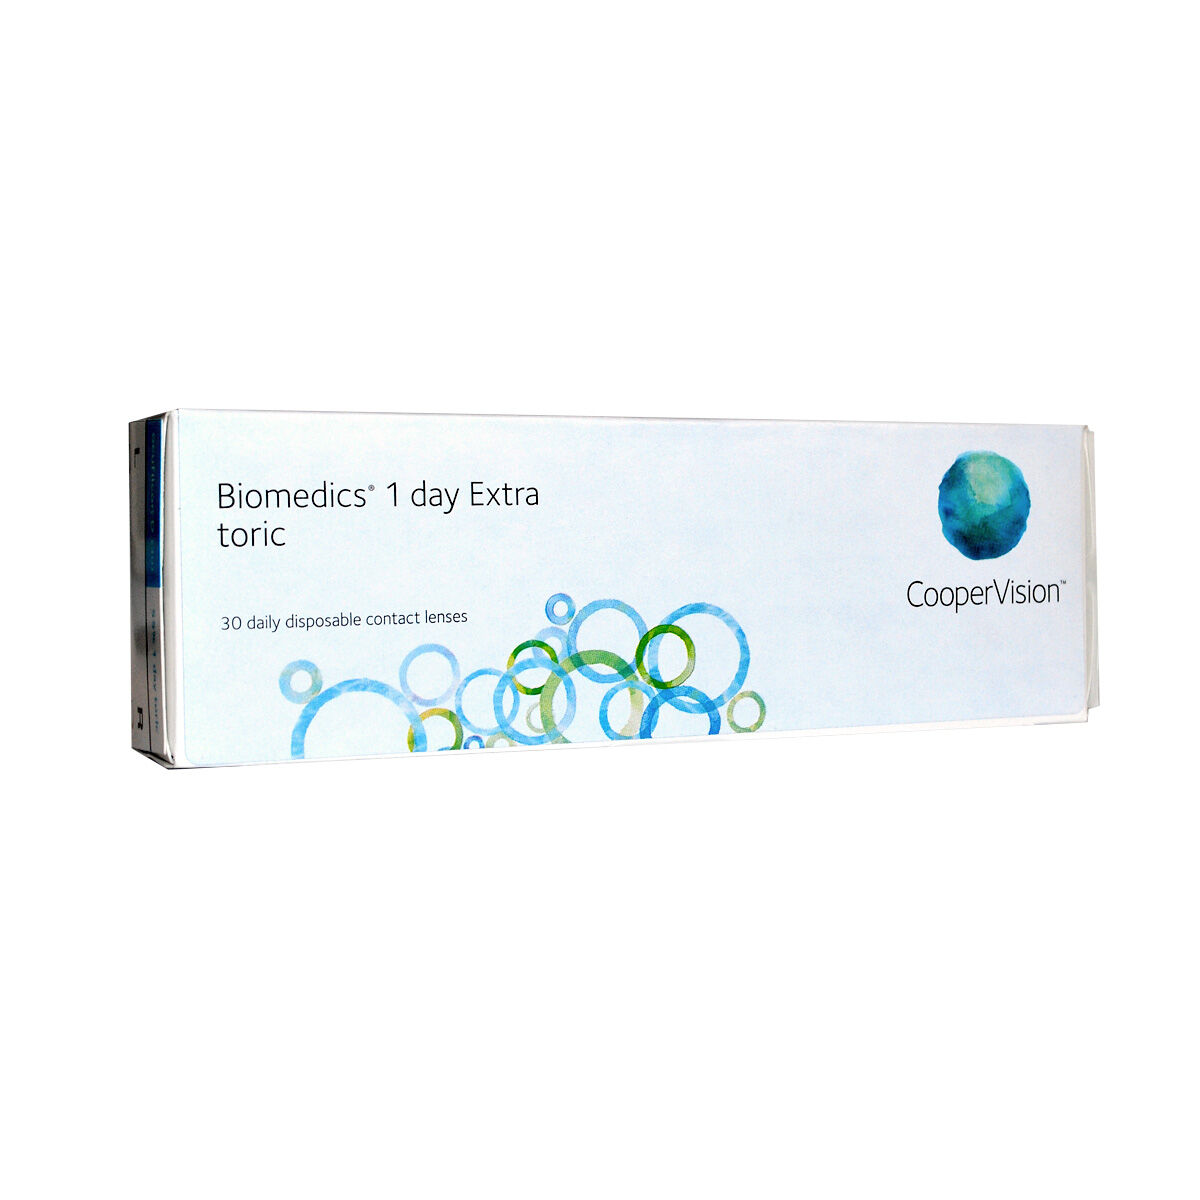 CooperVision Biomedics 1 Day Extra Toric (30 Contact Lenses), CooperVision, Daily Toric Lenses, Ocufilcon D